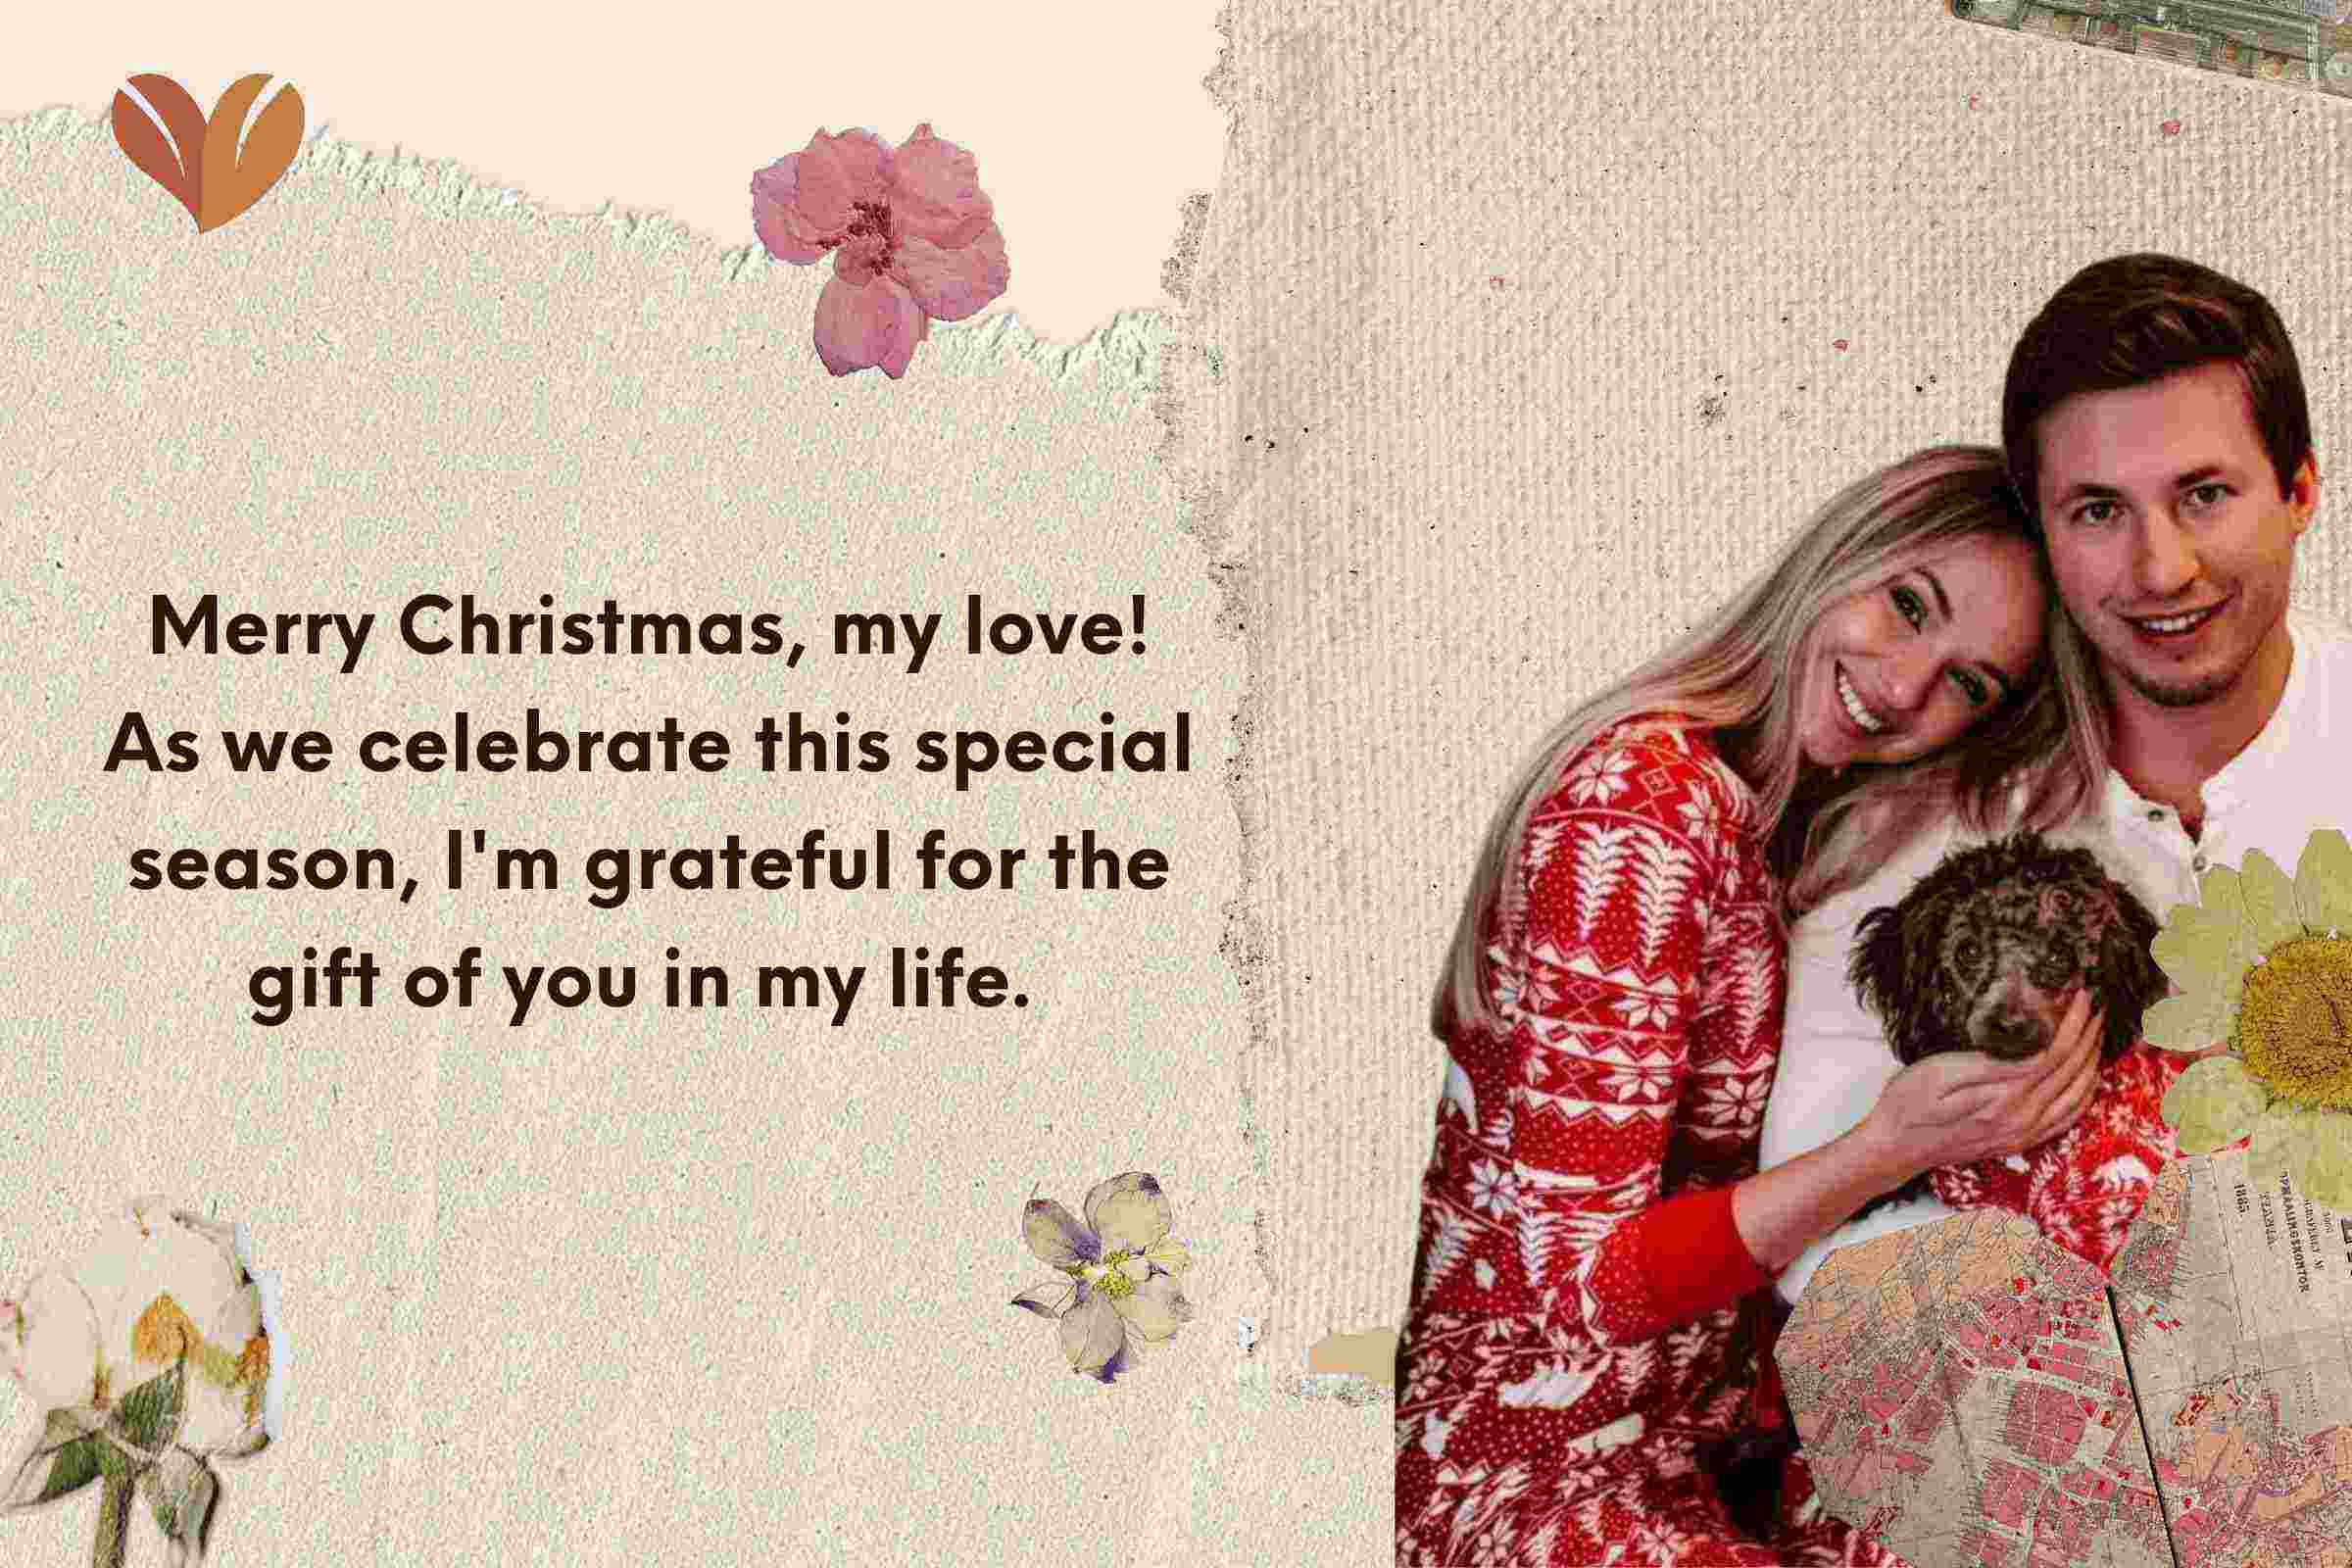 Merry Christmas, my love! As we celebrate this special season, I'm grateful for the gift of you in my life.